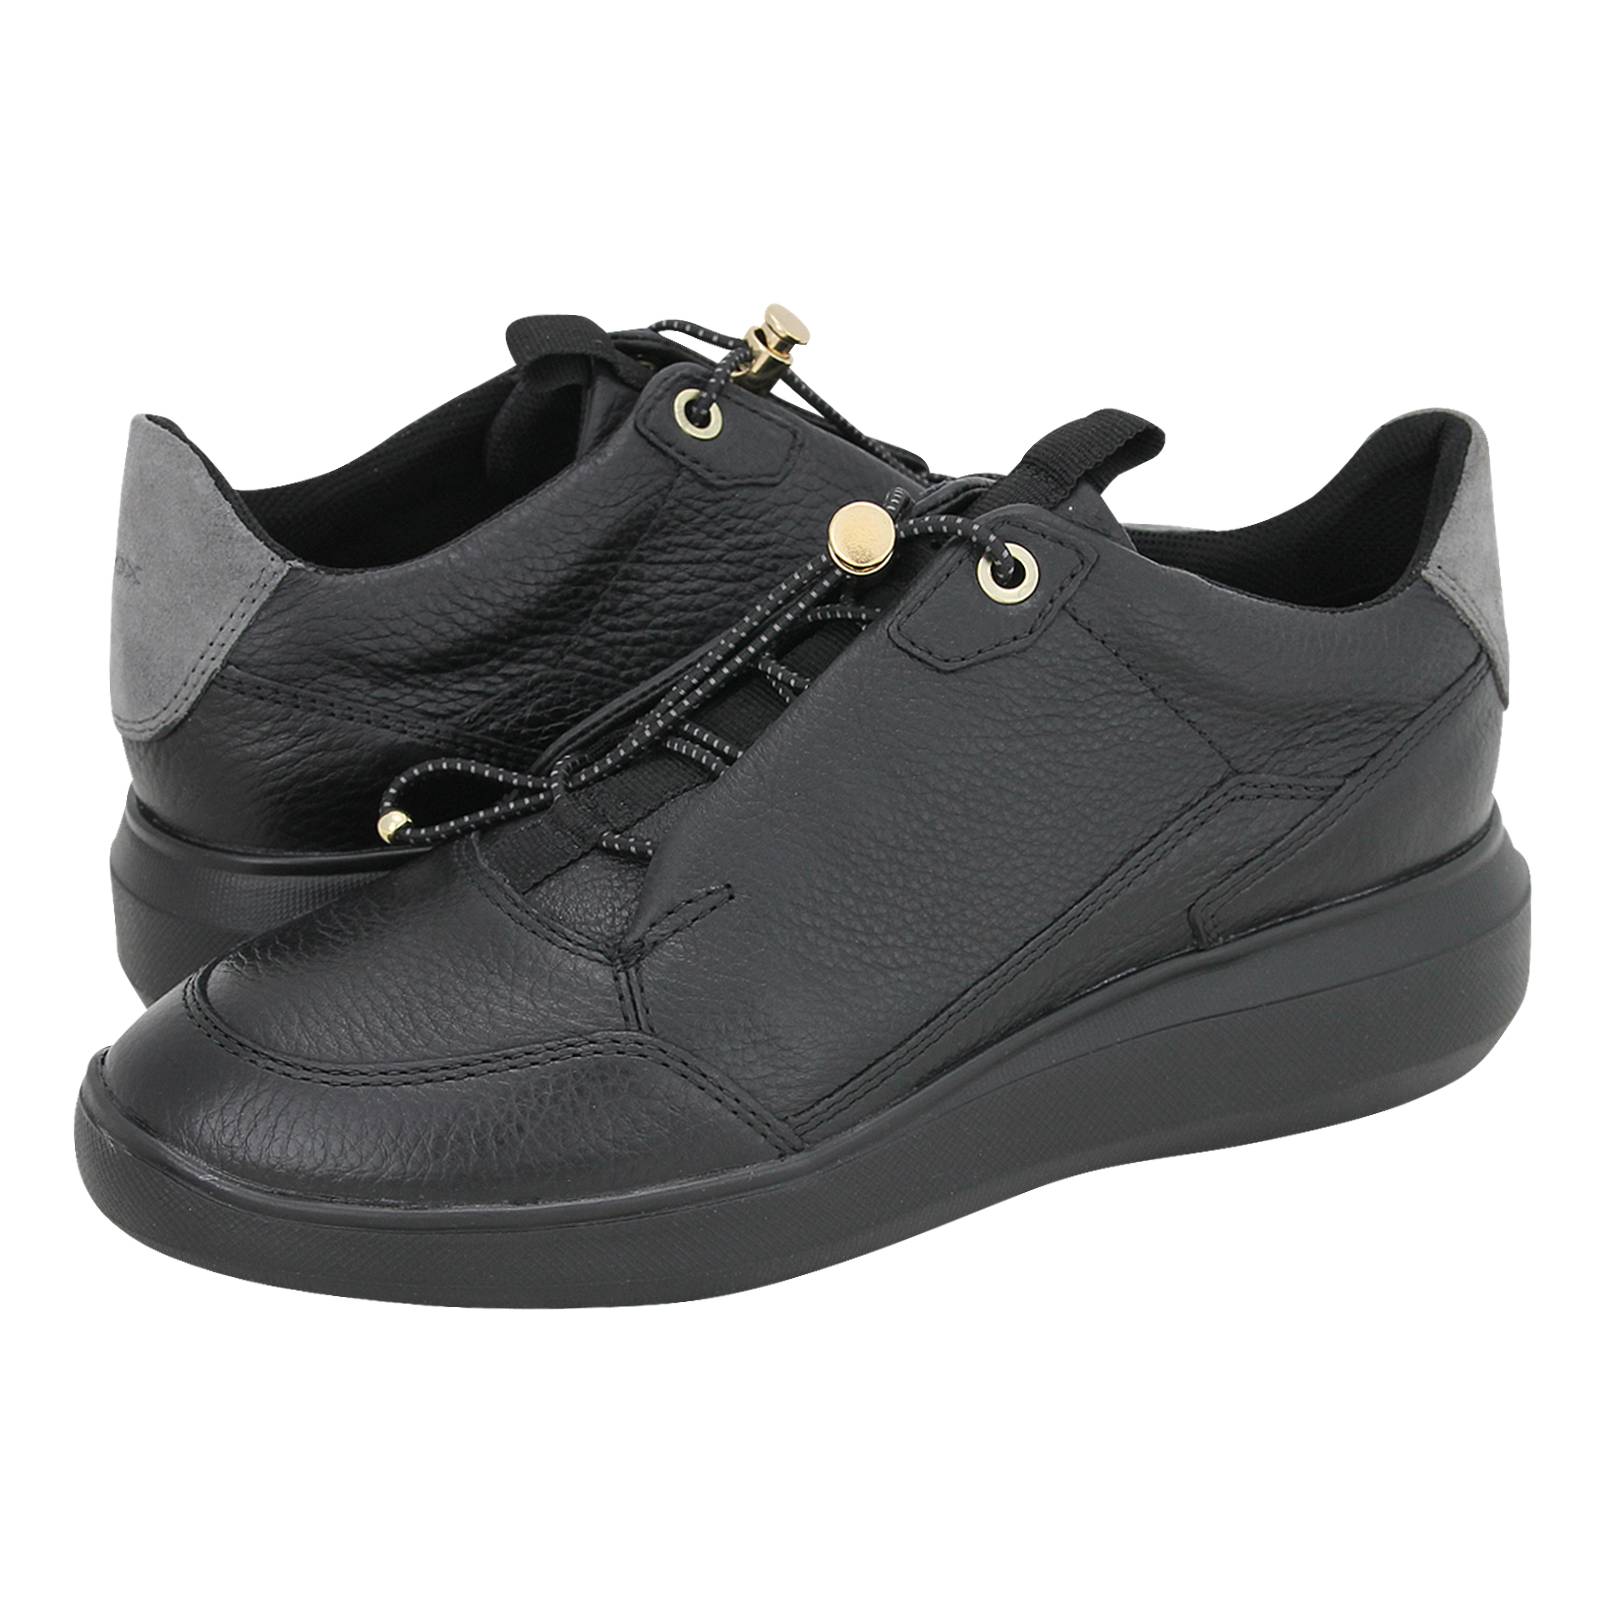 Evaluatie Seizoen gebed Rubidia B - Geox Women's casual shoes made of leather and suede - Gianna  Kazakou Online